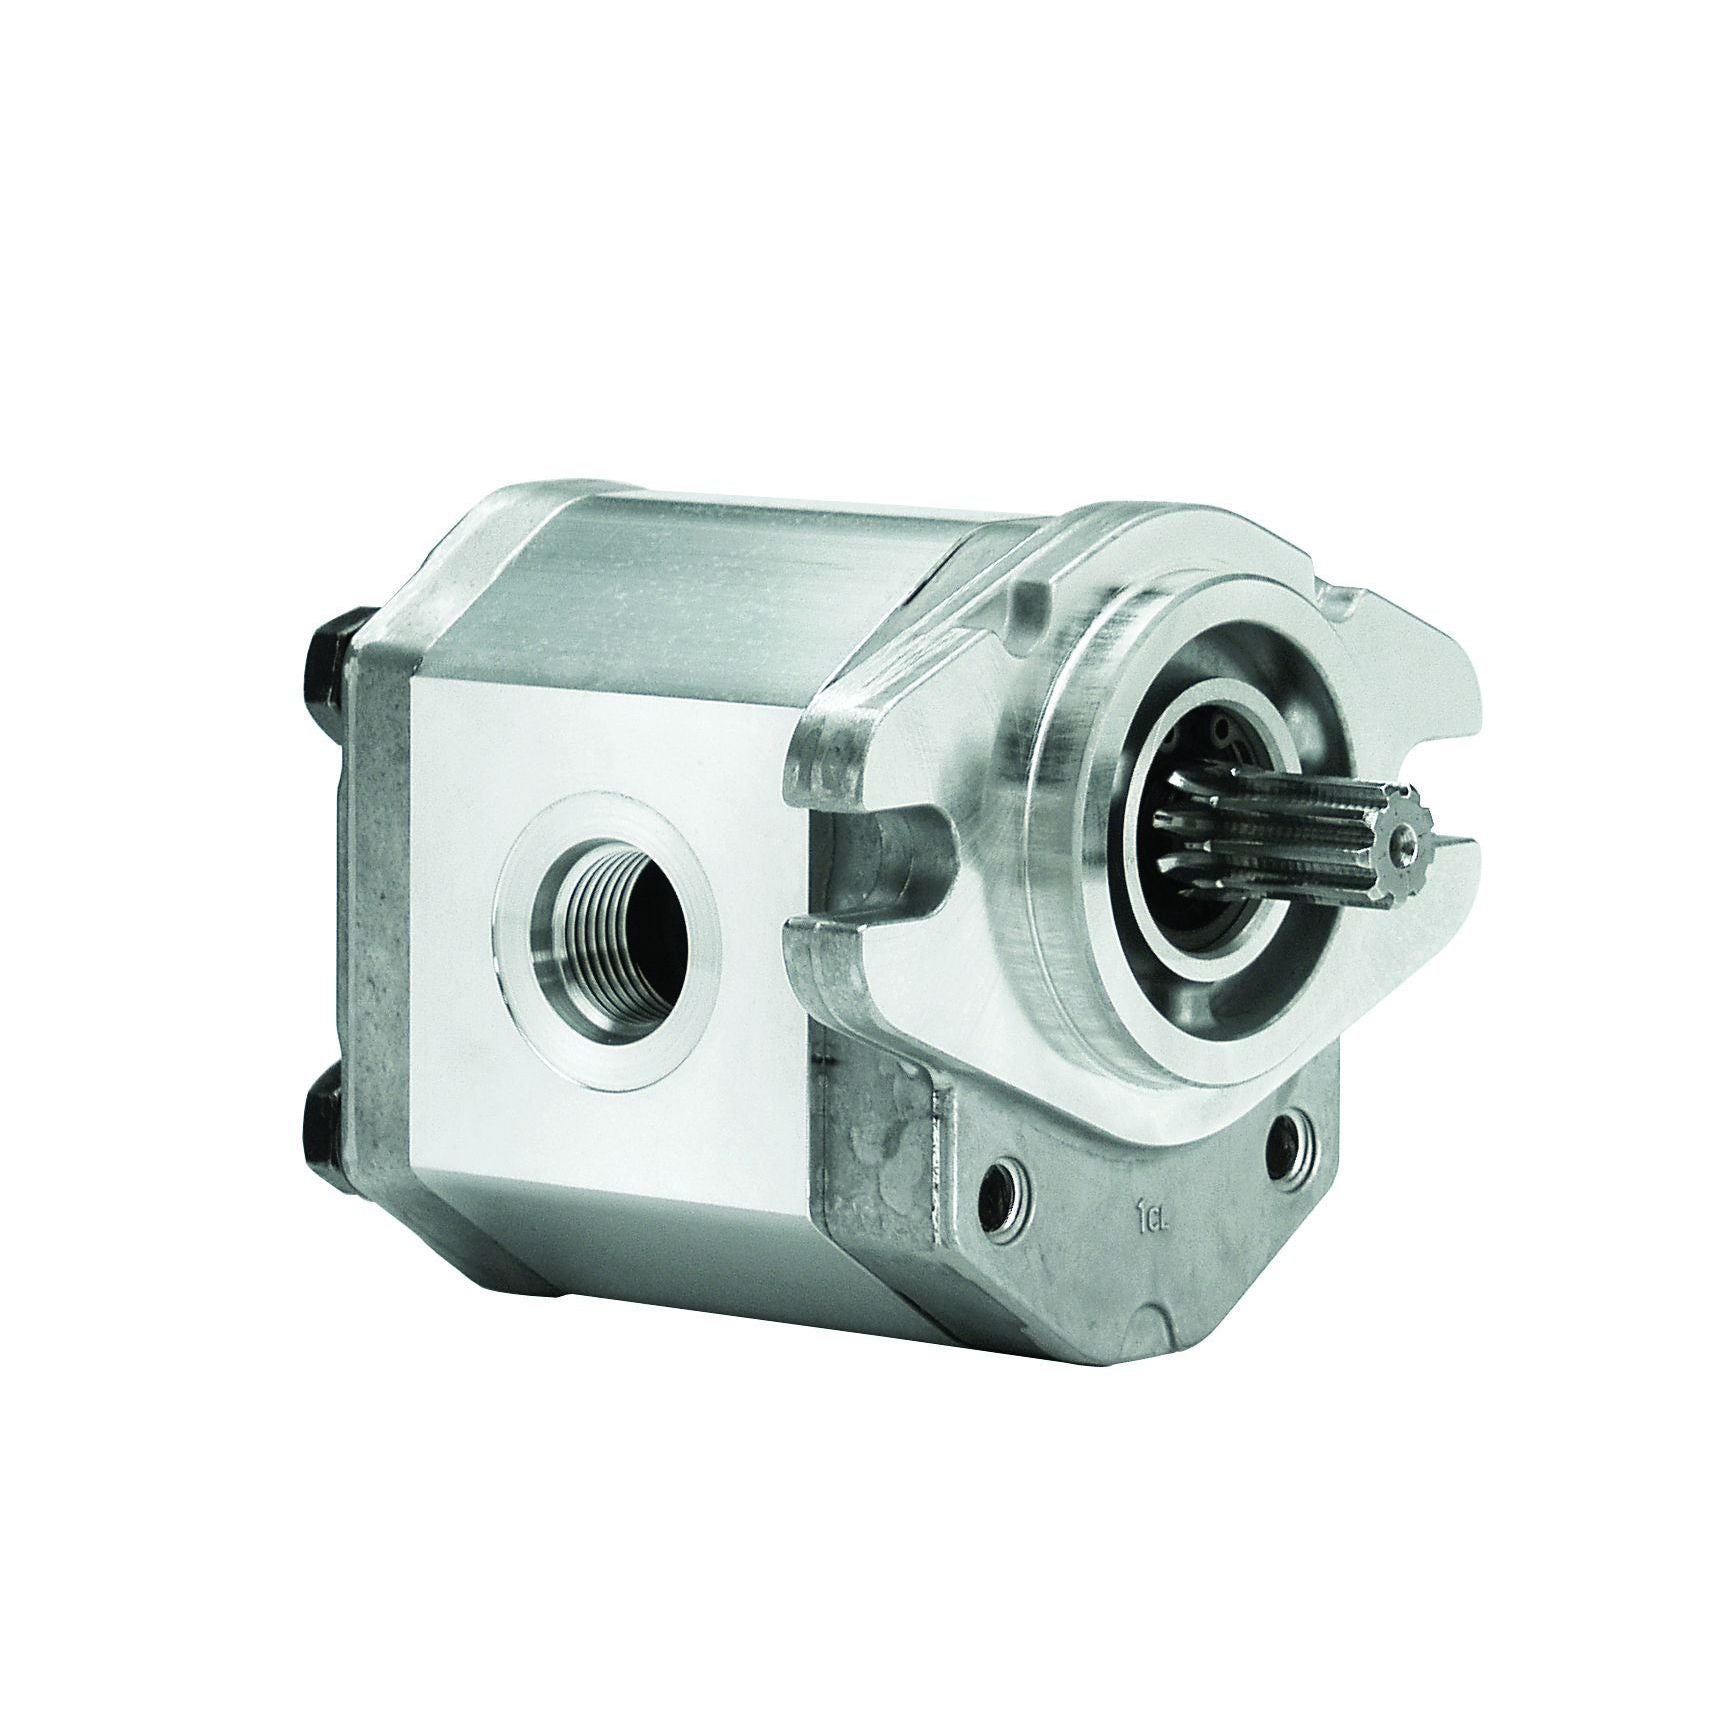 ALP3A-D-50-S1-FA : Marzocchi Gear Pump, CW, 33cc (2.013in3), 15.69 GPM, 3335psi, 3300 RPM, #16 SAE (1") In, #12 SAE (3/4") Out, Splined Shaft 13T 16/32DP, SAE B 2-Bolt Mount